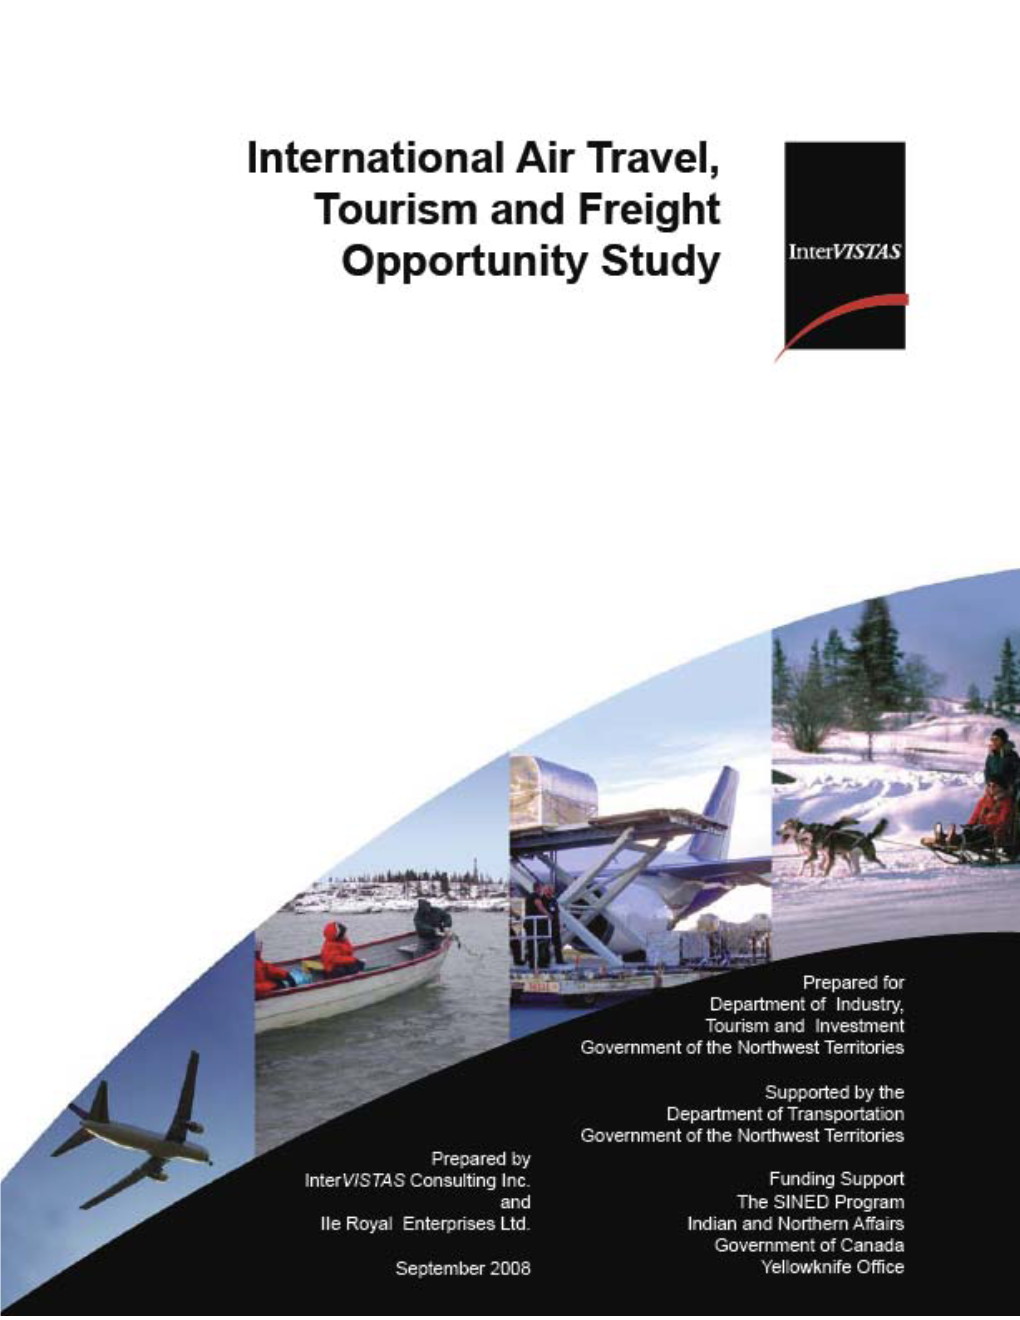 International Air Travel, Tourism and Freight Opportunity Study Ii